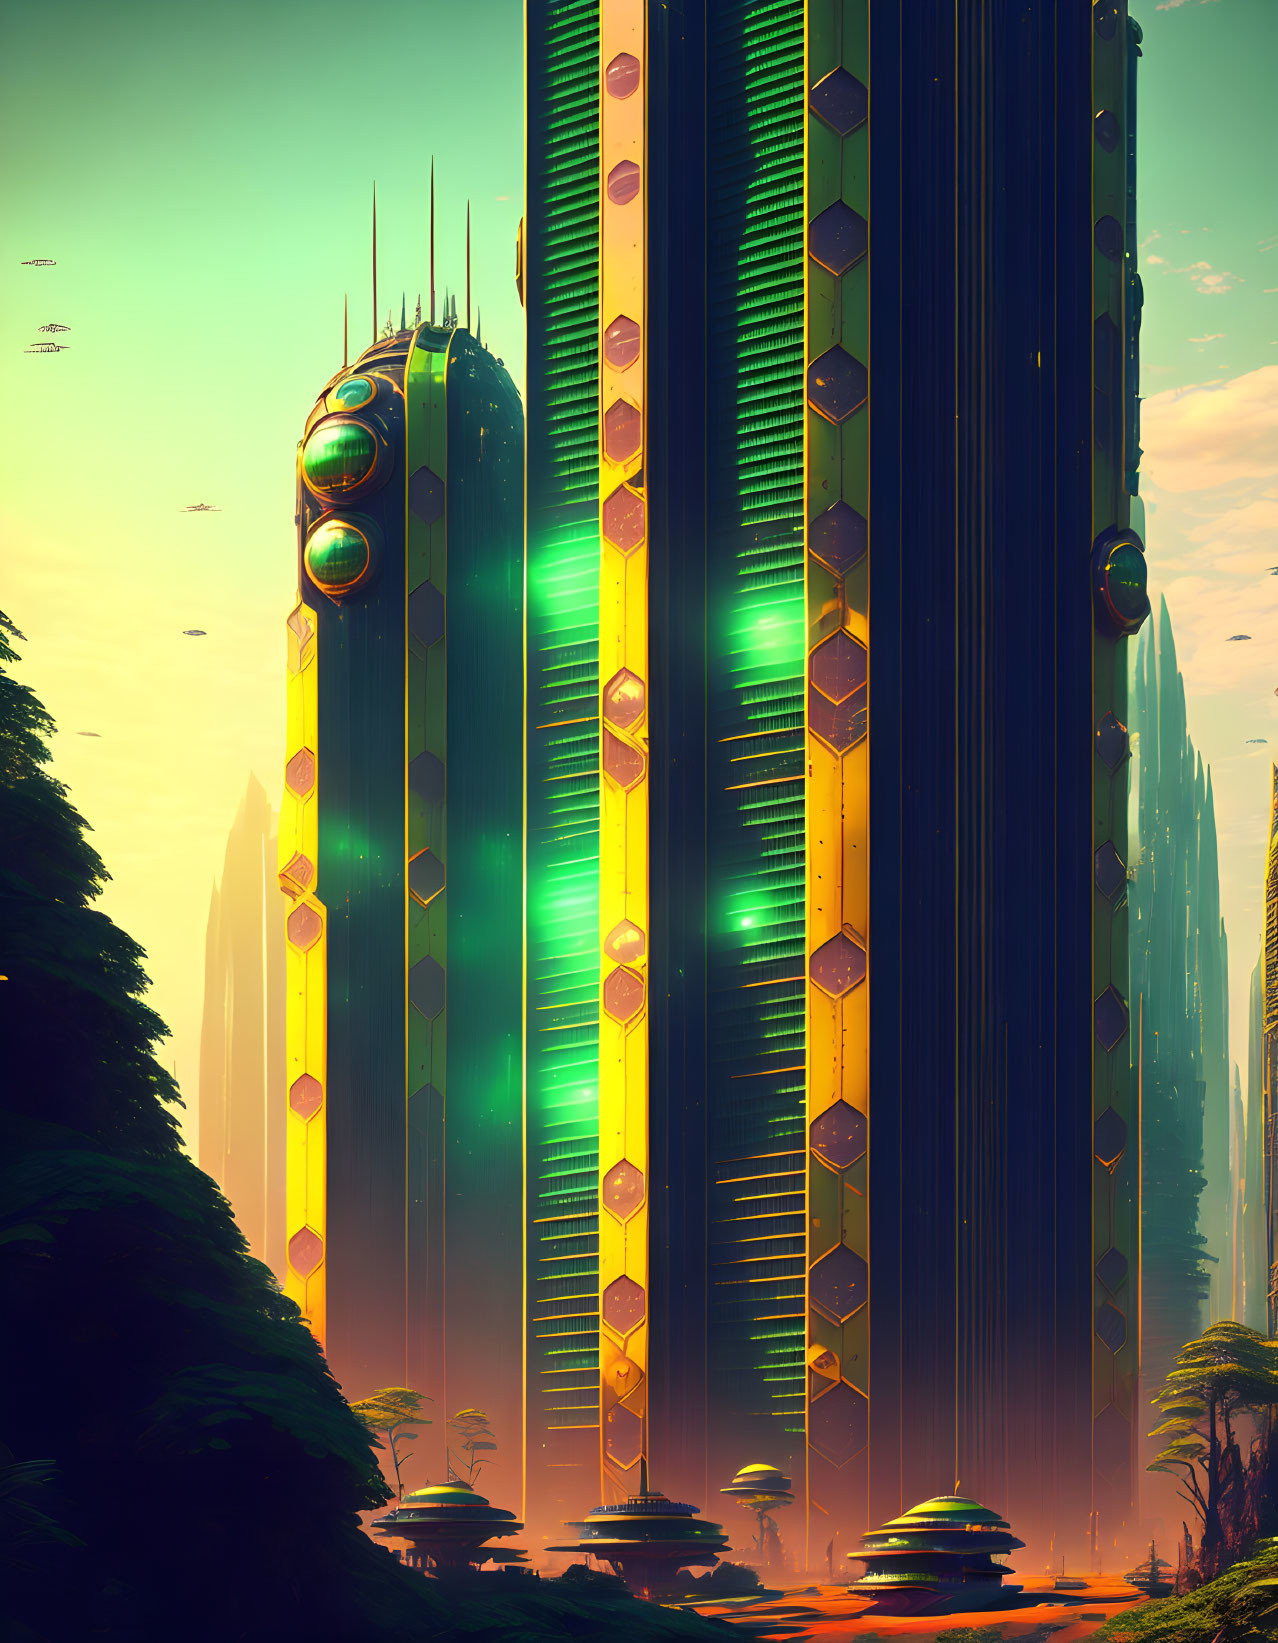 Futuristic skyscrapers with glowing patterns in vibrant alien forest